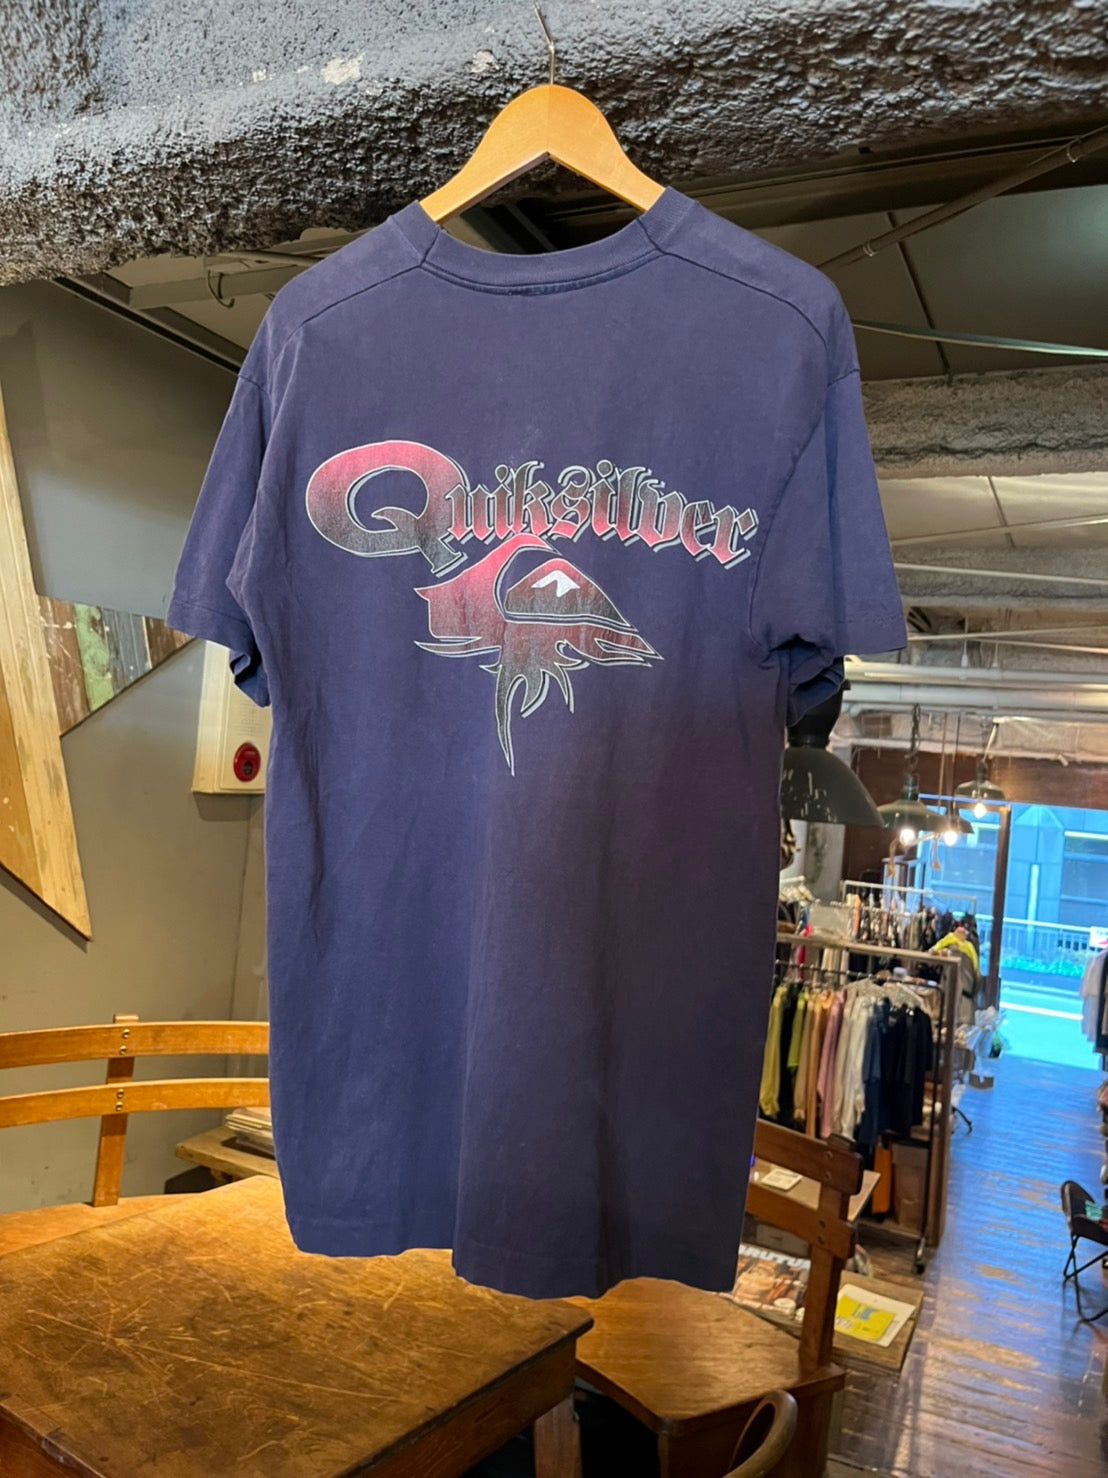 【Quiksilver】90's vintage Quiksilver surf skate  t-shirt made in Canada (men's L)